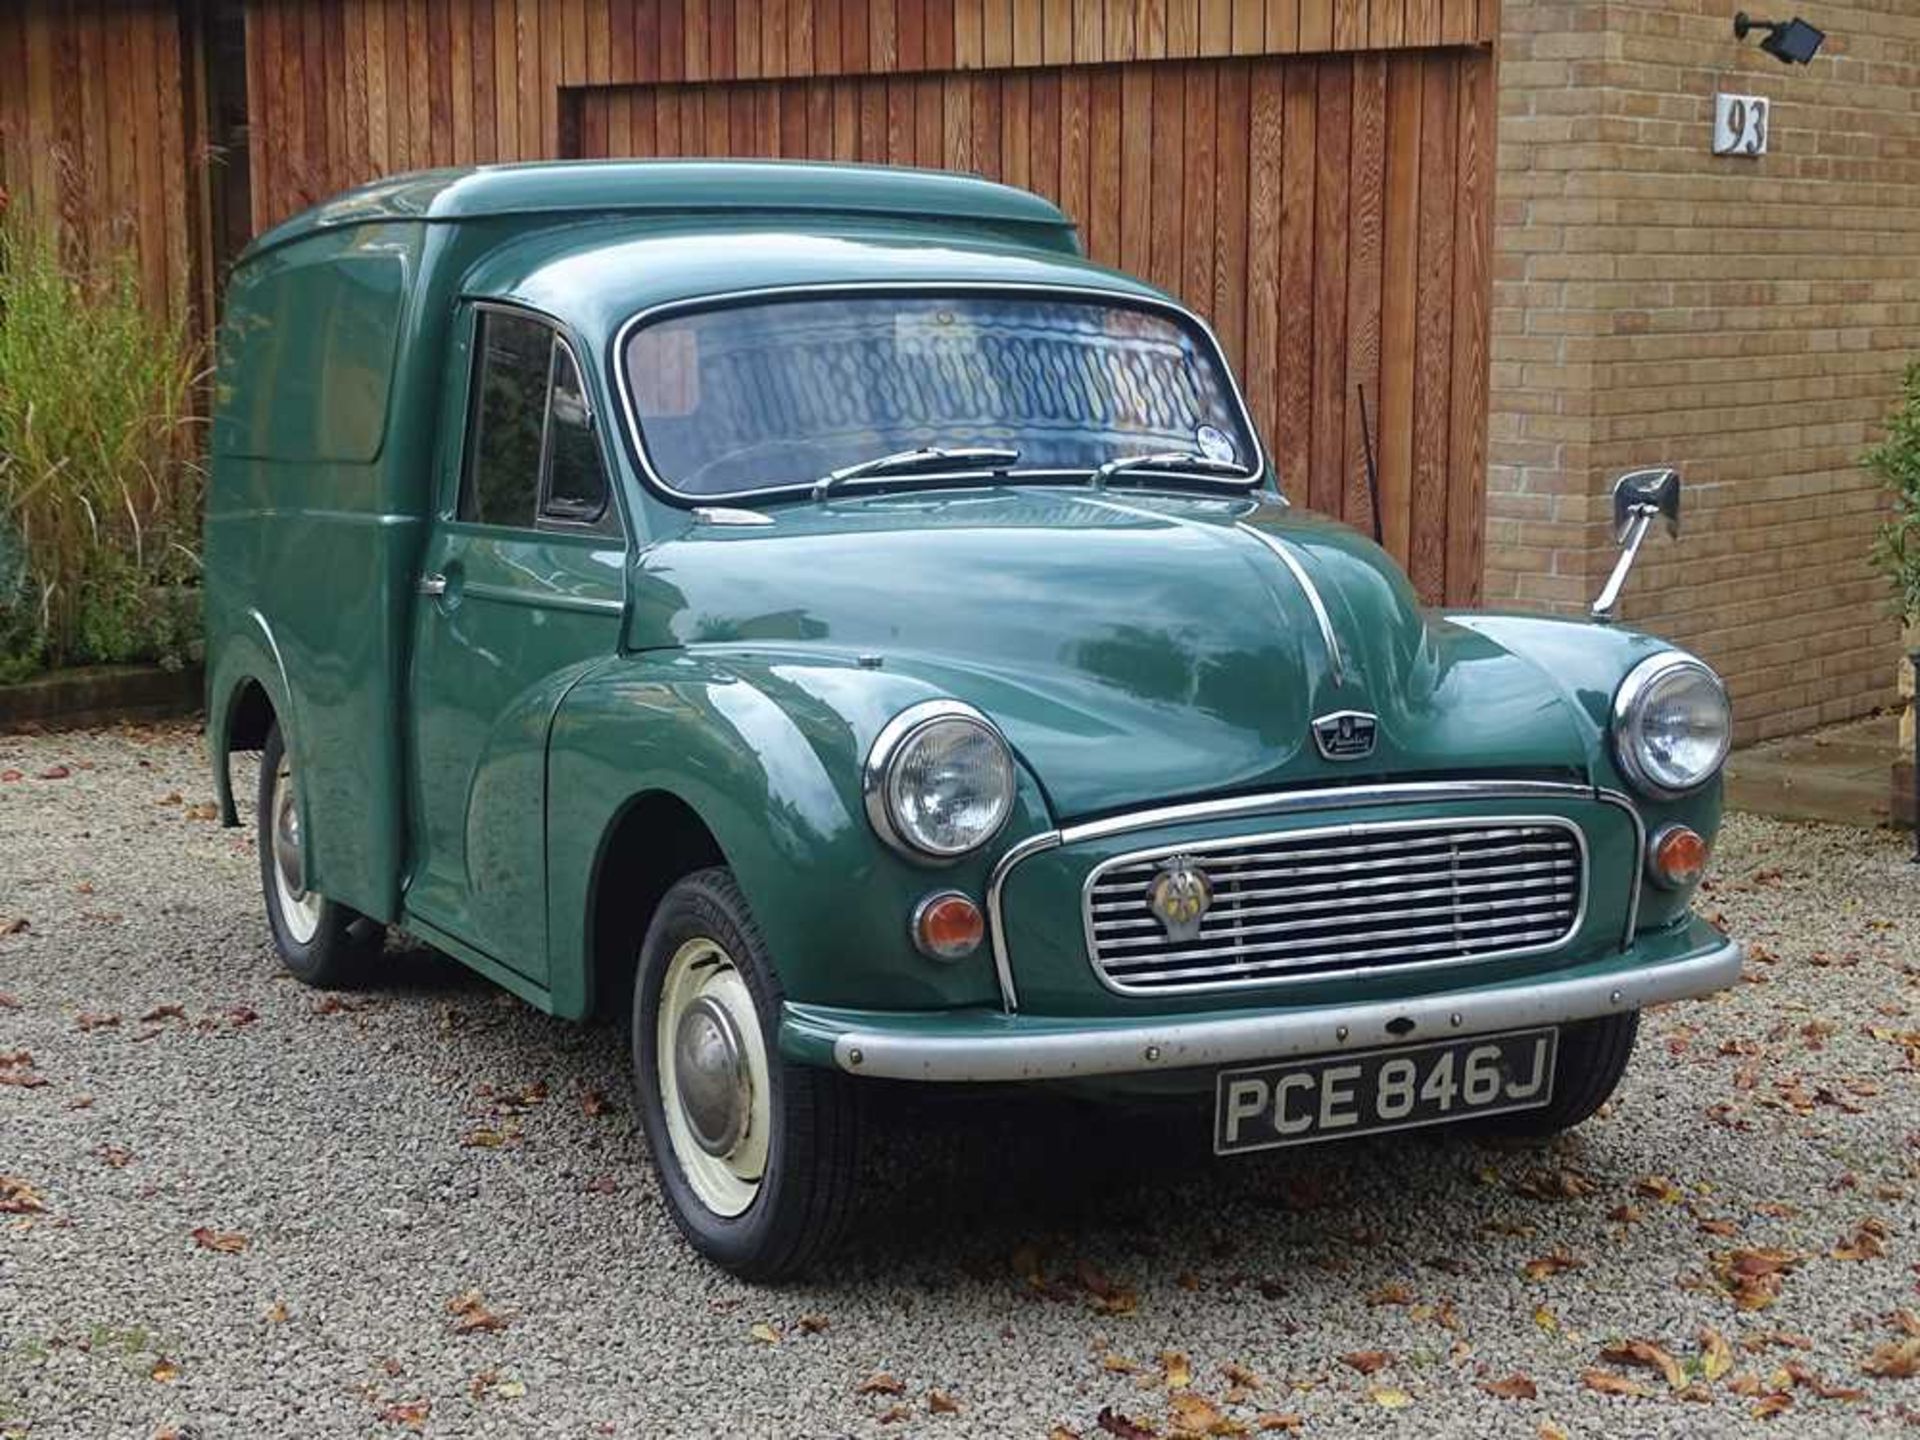 1970 Austin 6 CWT Van Single Family Ownership From New - Image 7 of 45